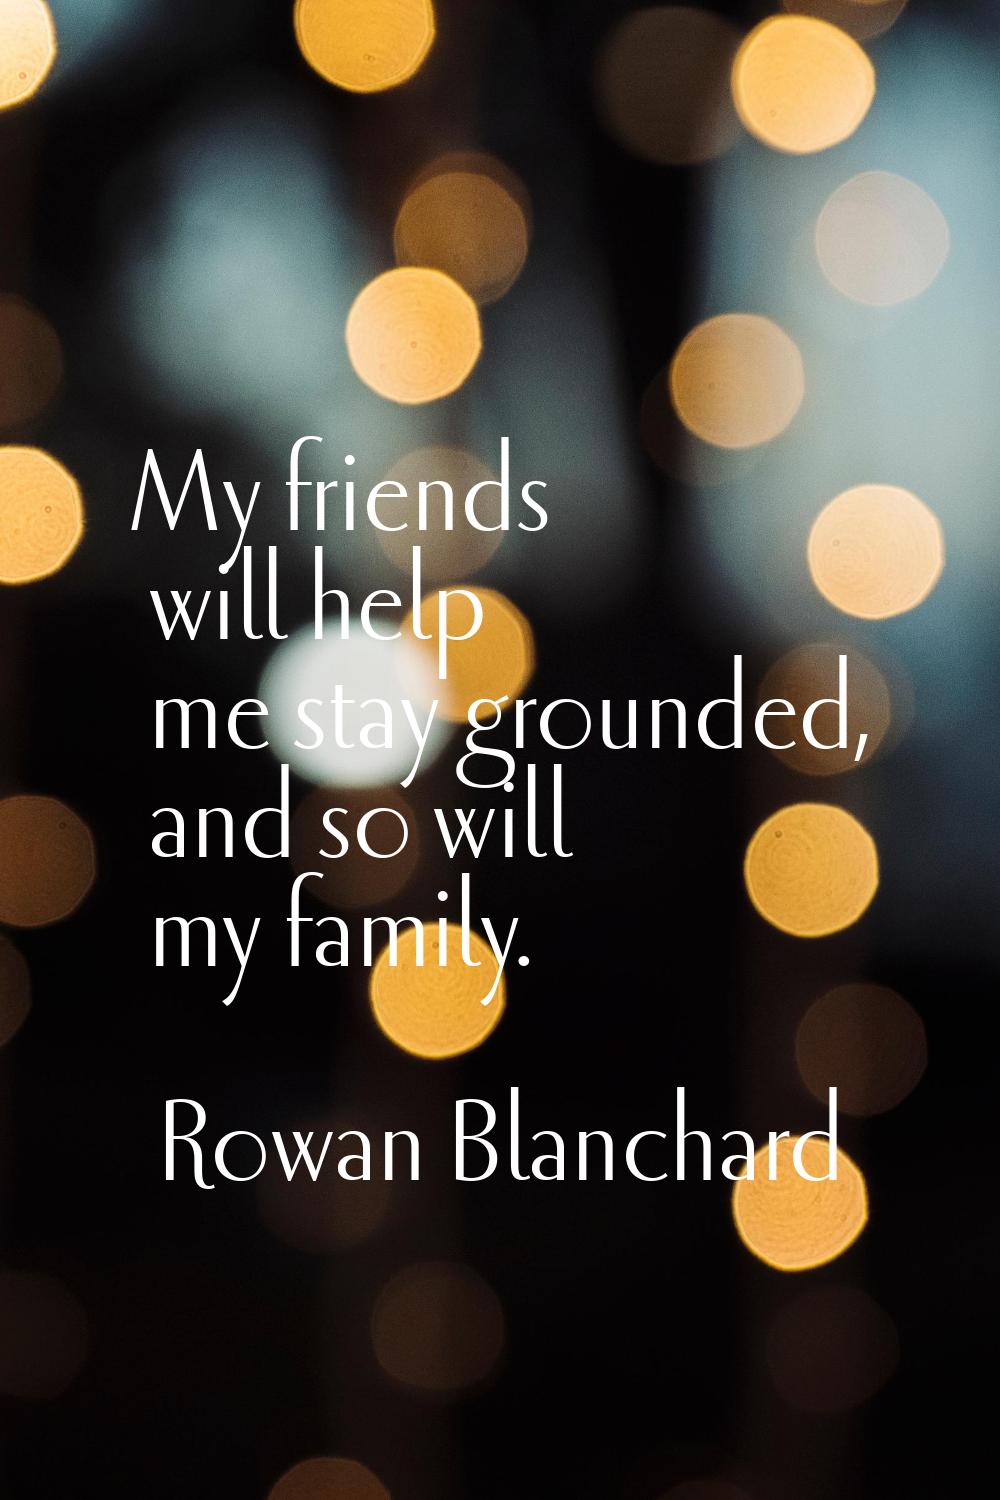 My friends will help me stay grounded, and so will my family.